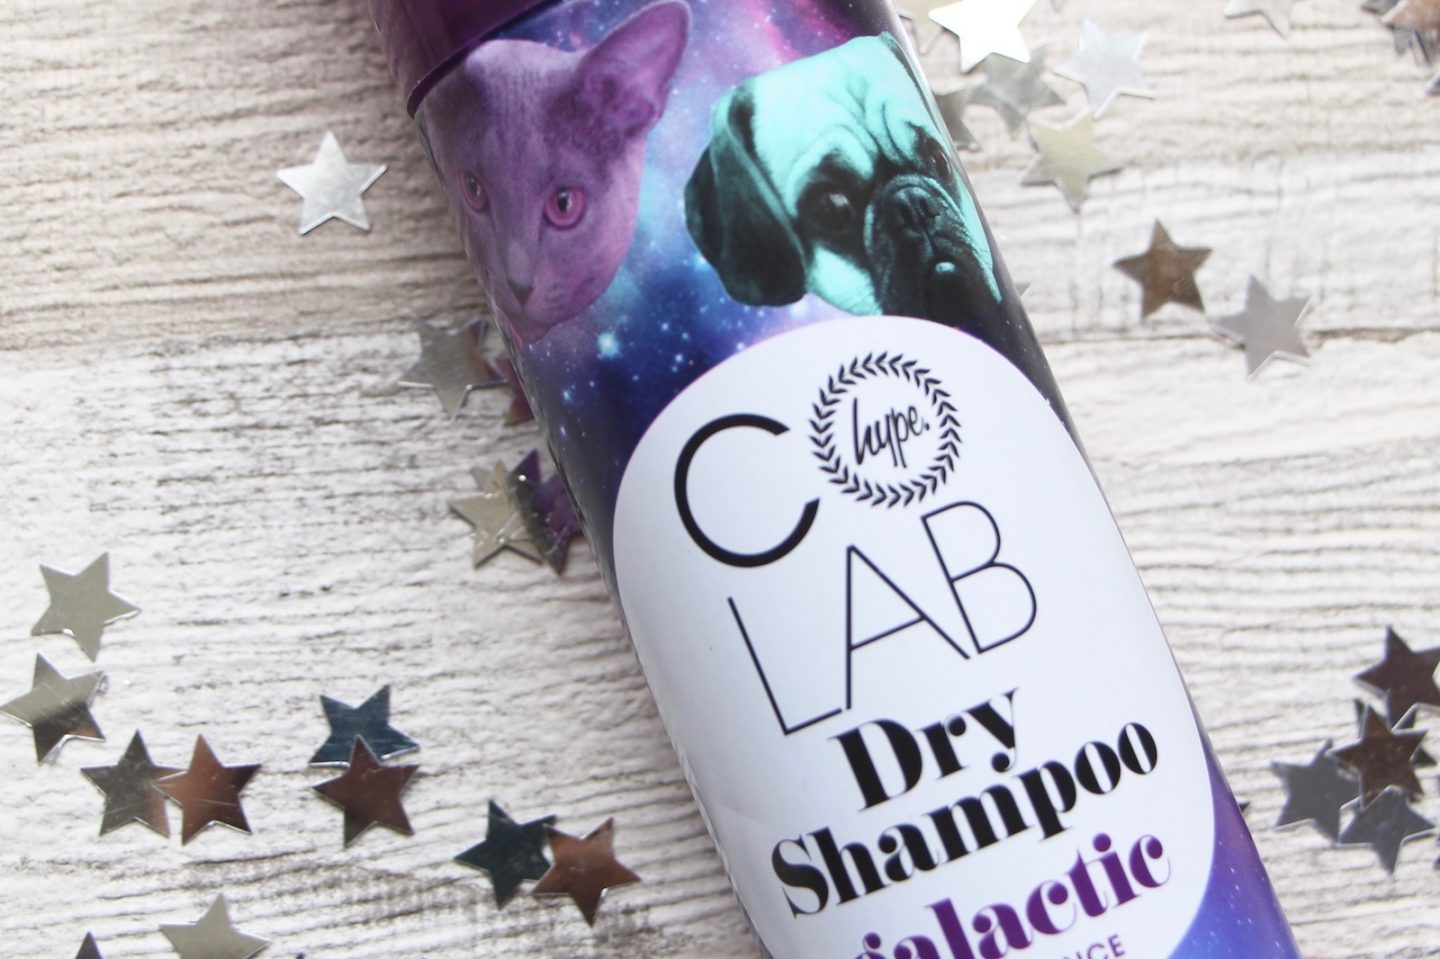 colab dry shampoo at boots